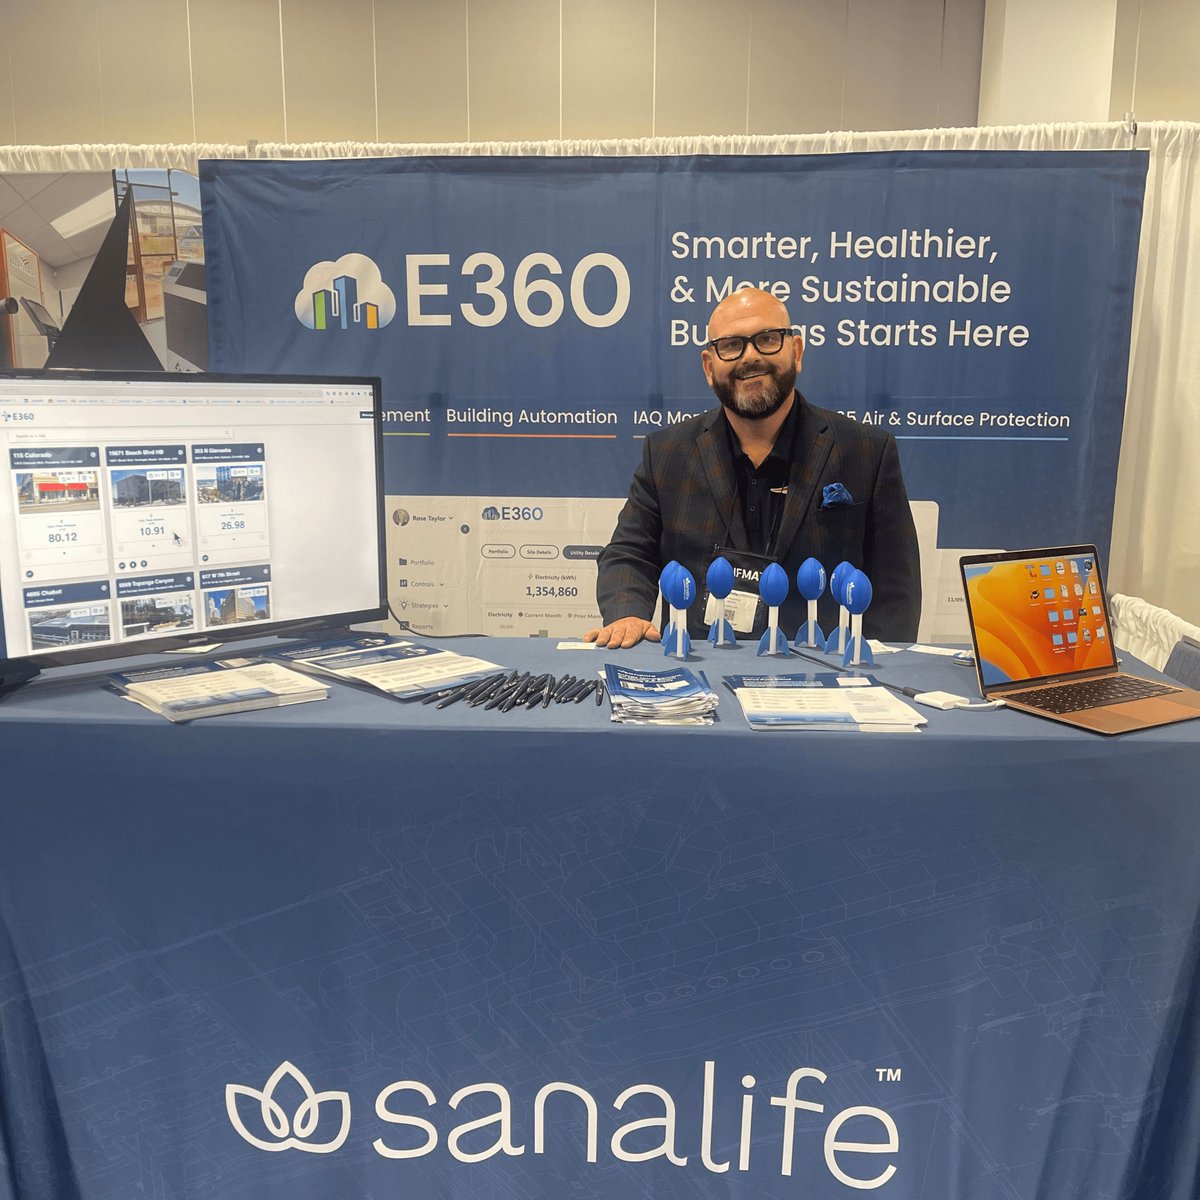 If you're at IFMA #WorldWorkplace stop by booth 364 for a demo of Sanalife's E360--#EnergyManagement and #IndoorAirQuality solutions!
•••
#FMindustry #FM #PropertyManagement #IFMADenver #WWP23 #IFMA2023